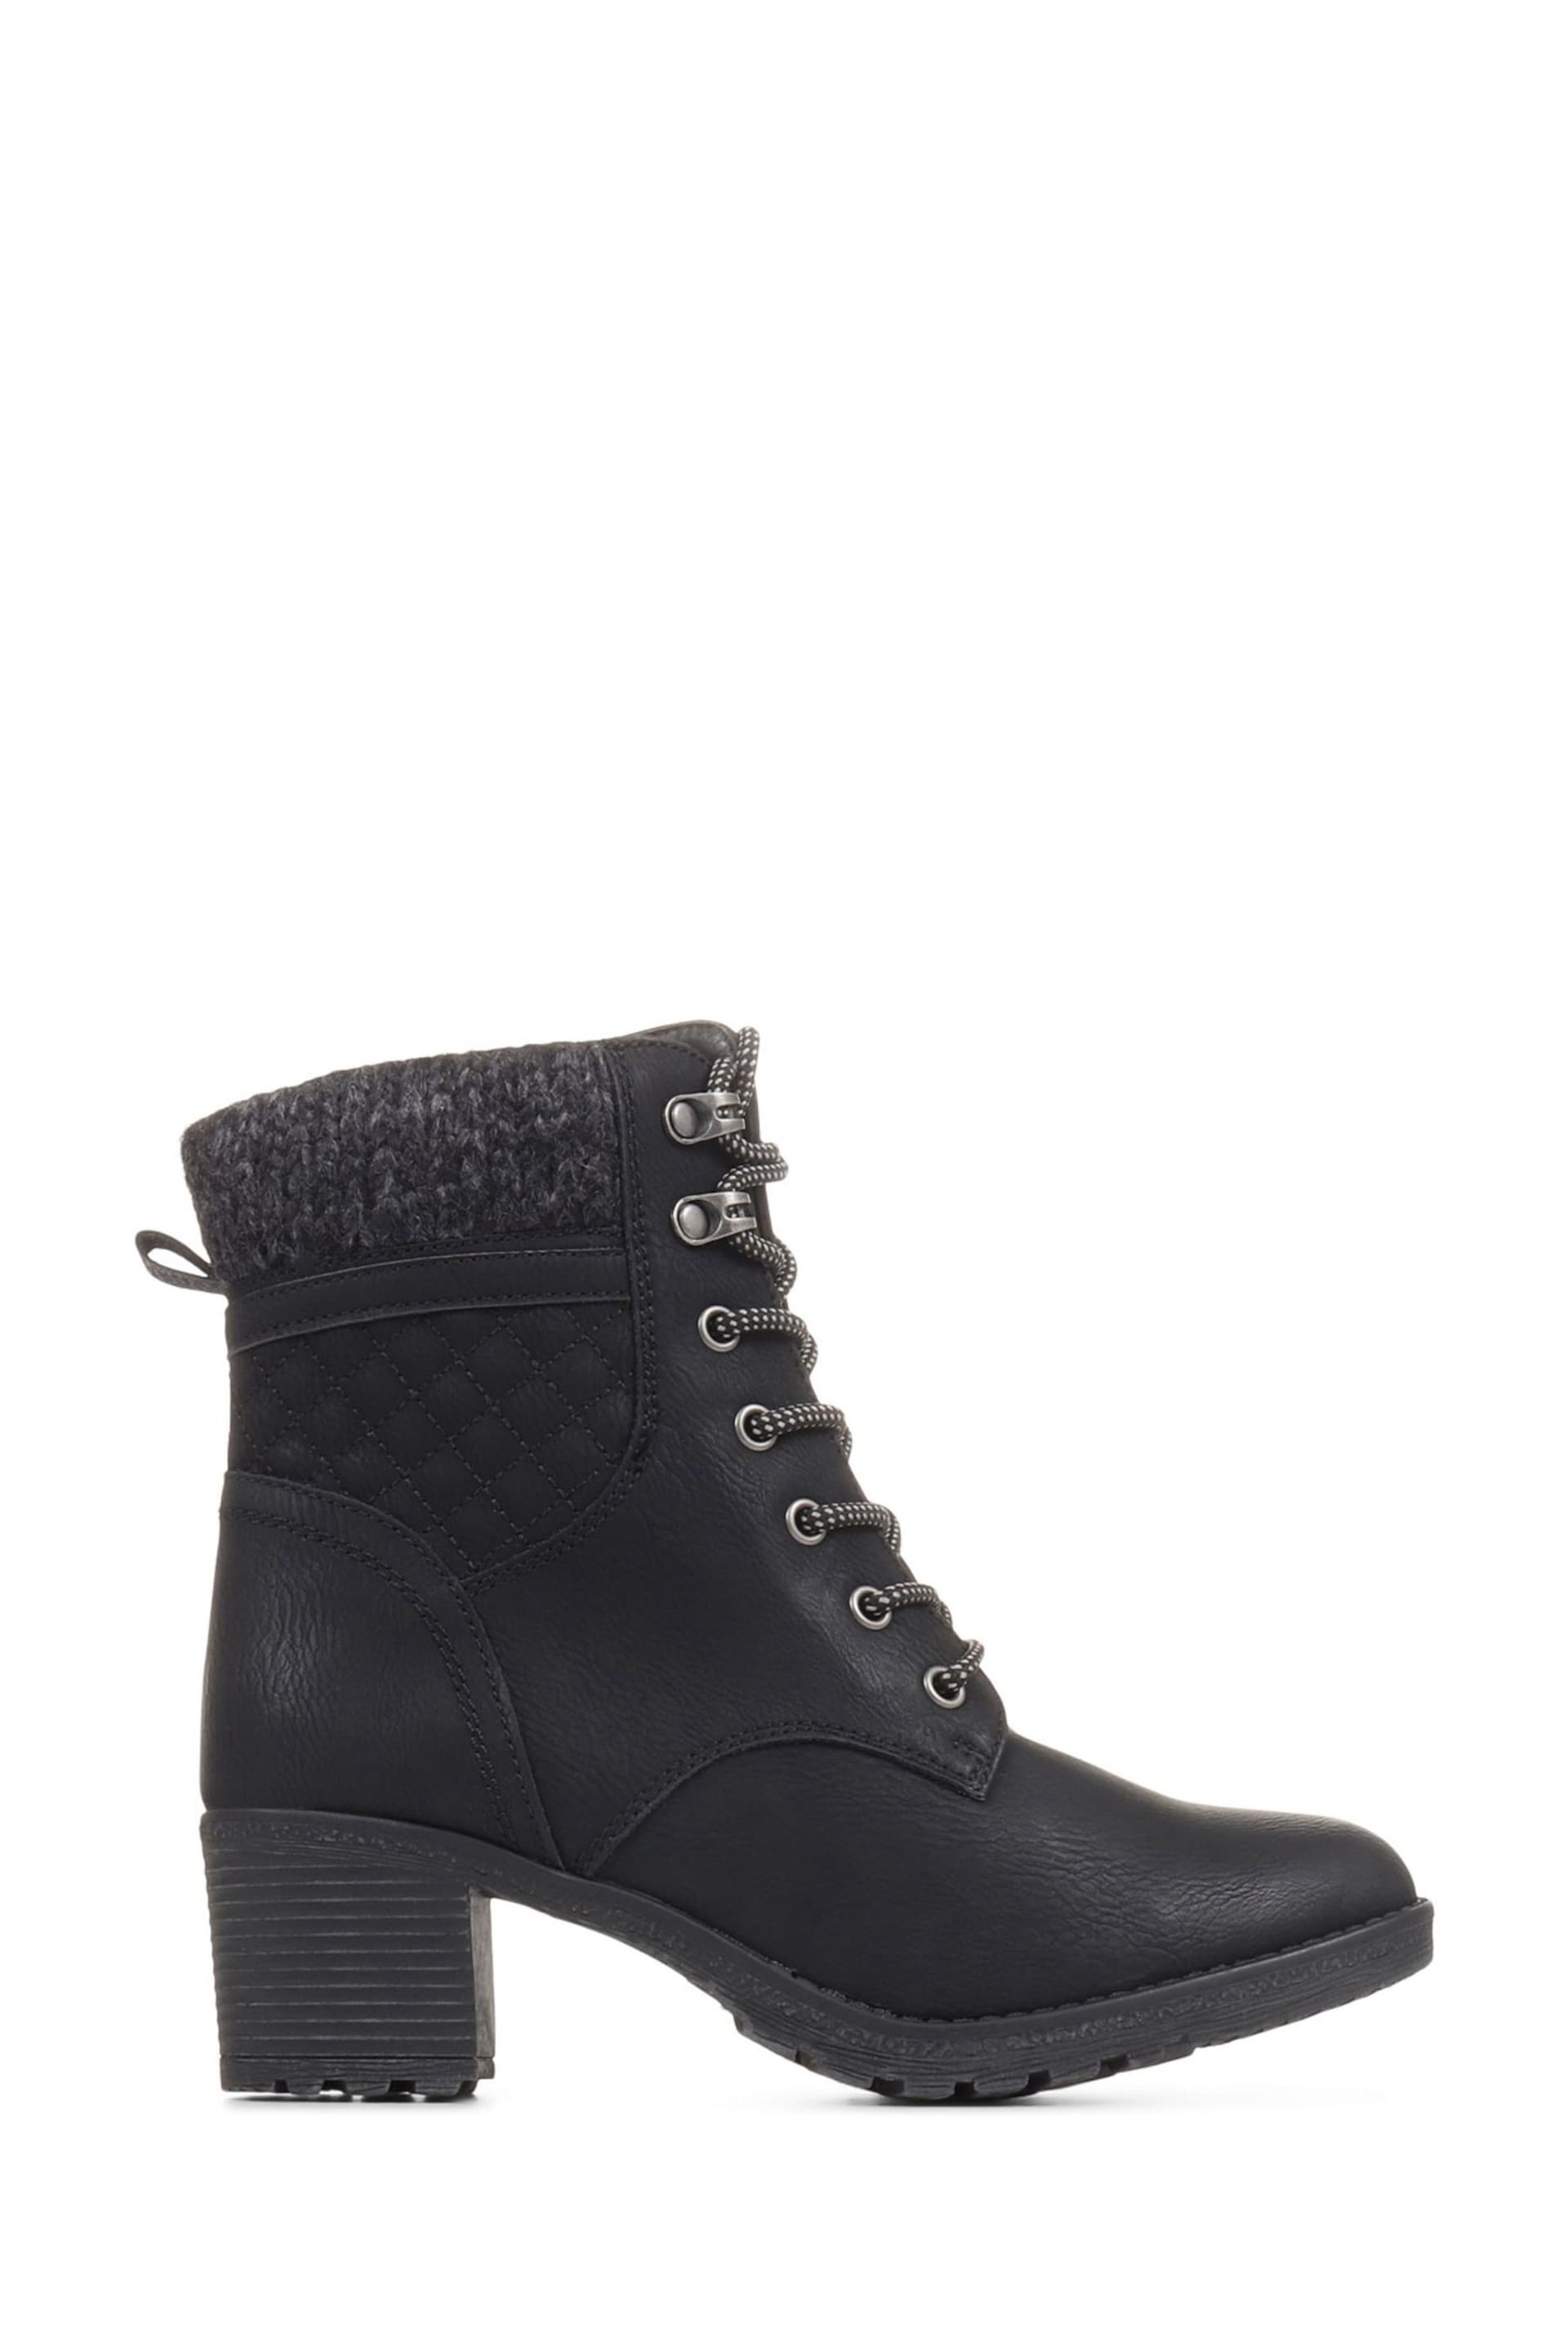 Pavers Lace-Up Ankle Black Boots - Image 2 of 5